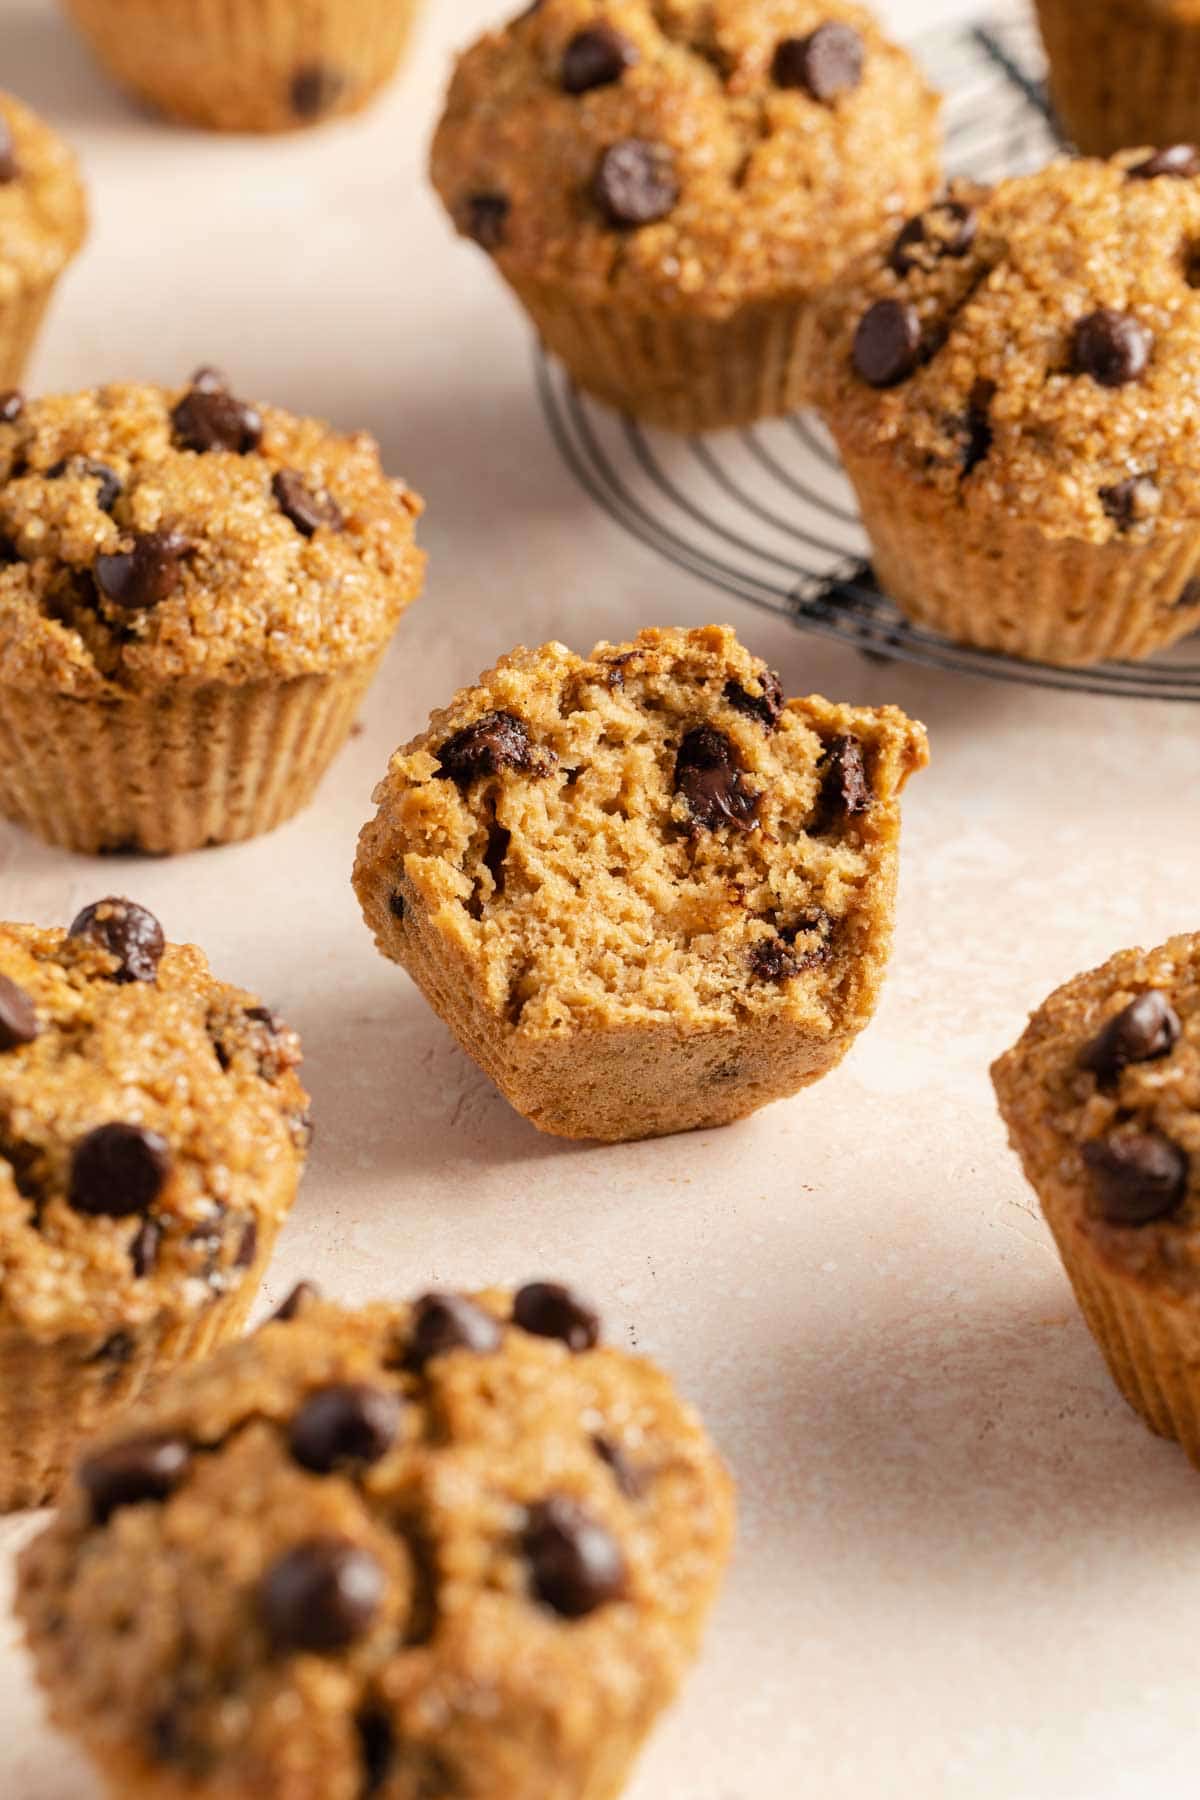 Chocolate chip oatmeal muffins with a bite taken out of one.